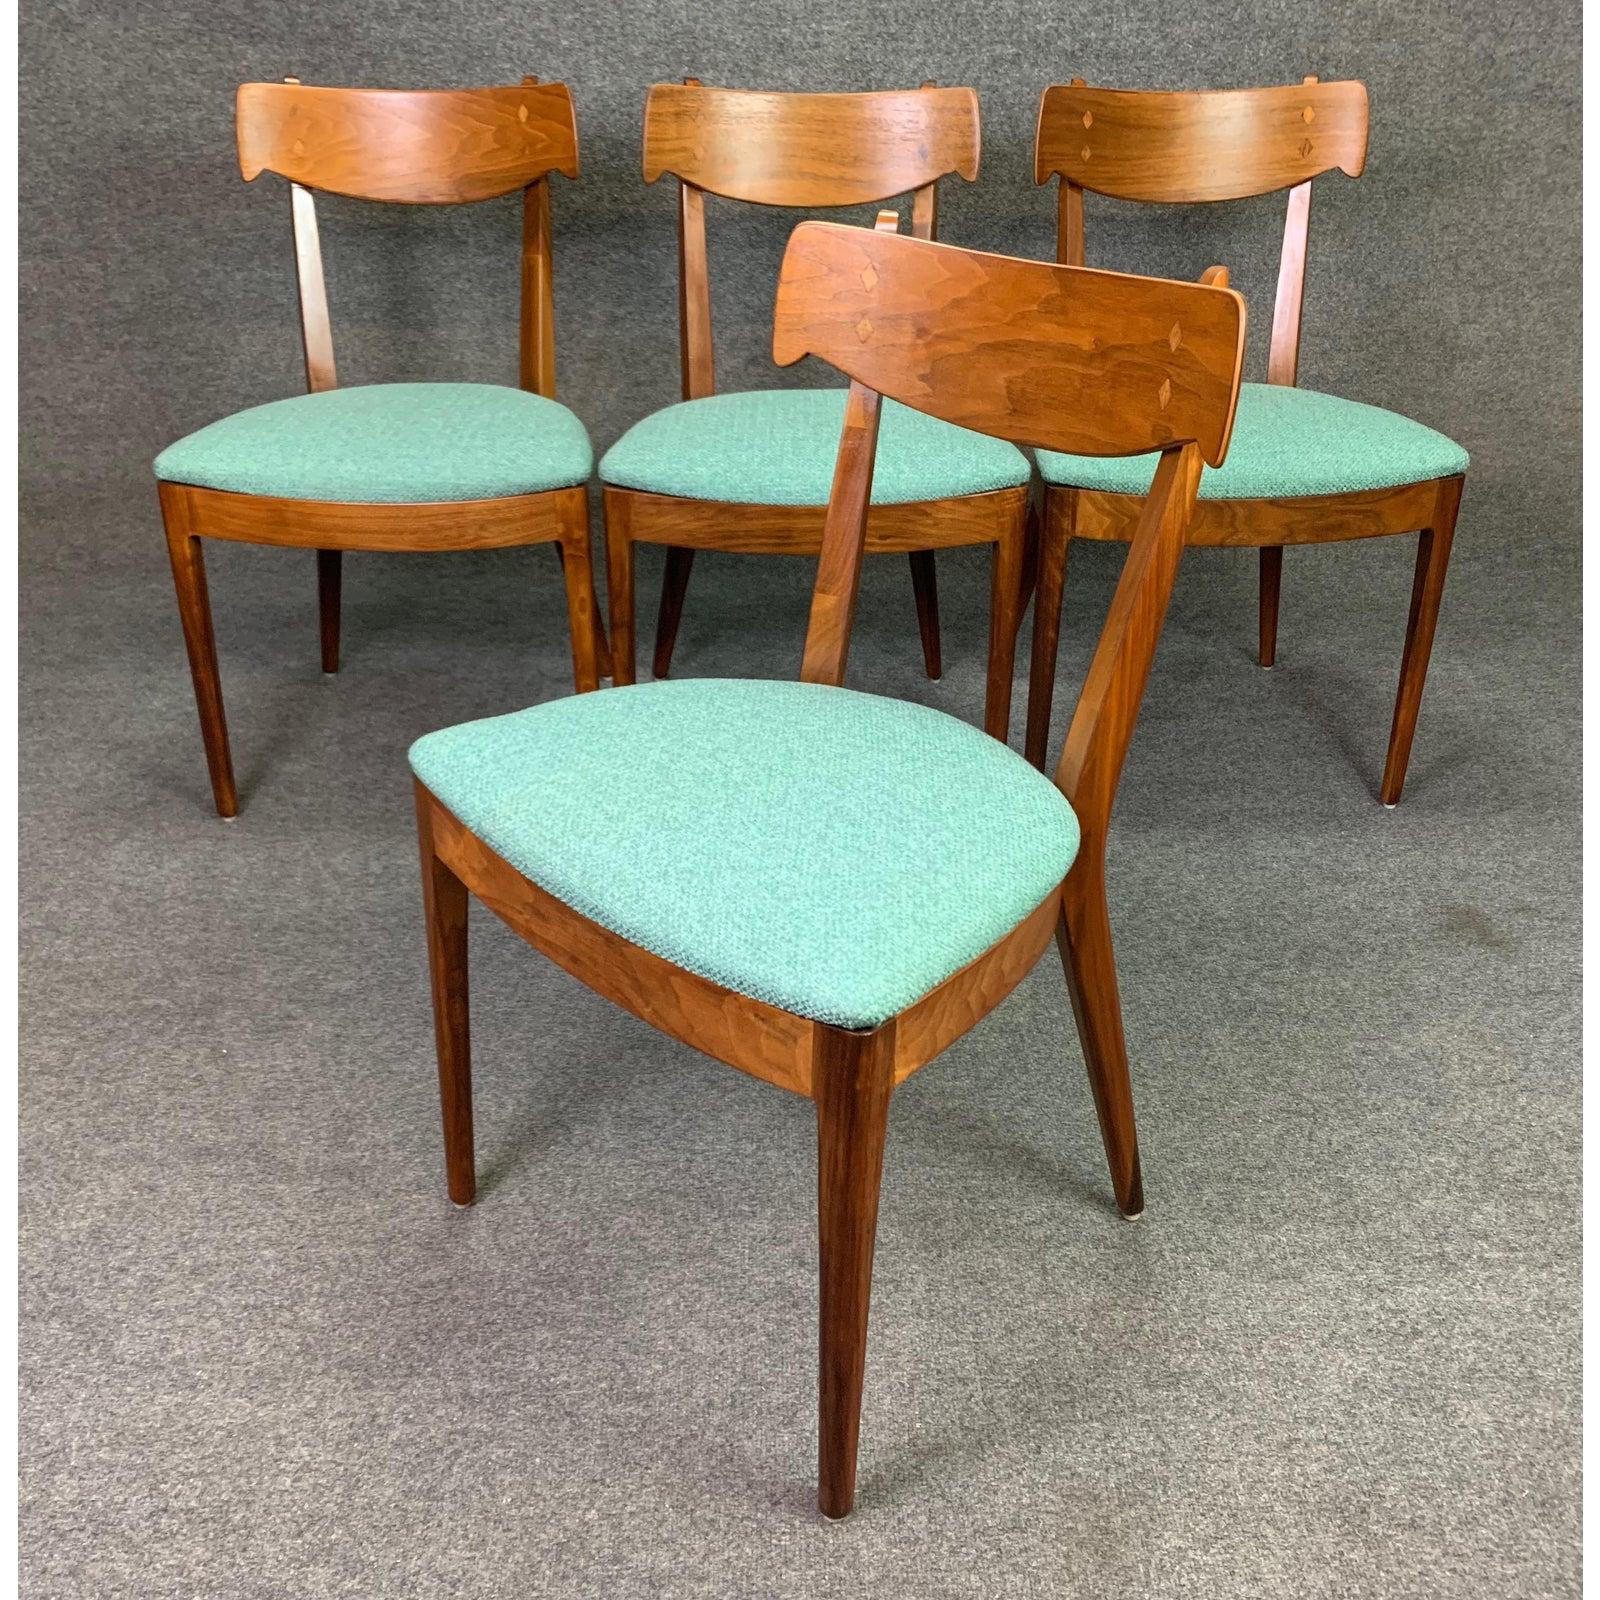 Here is a beautiful midcentury set of four dining chairs in walnut part of the 